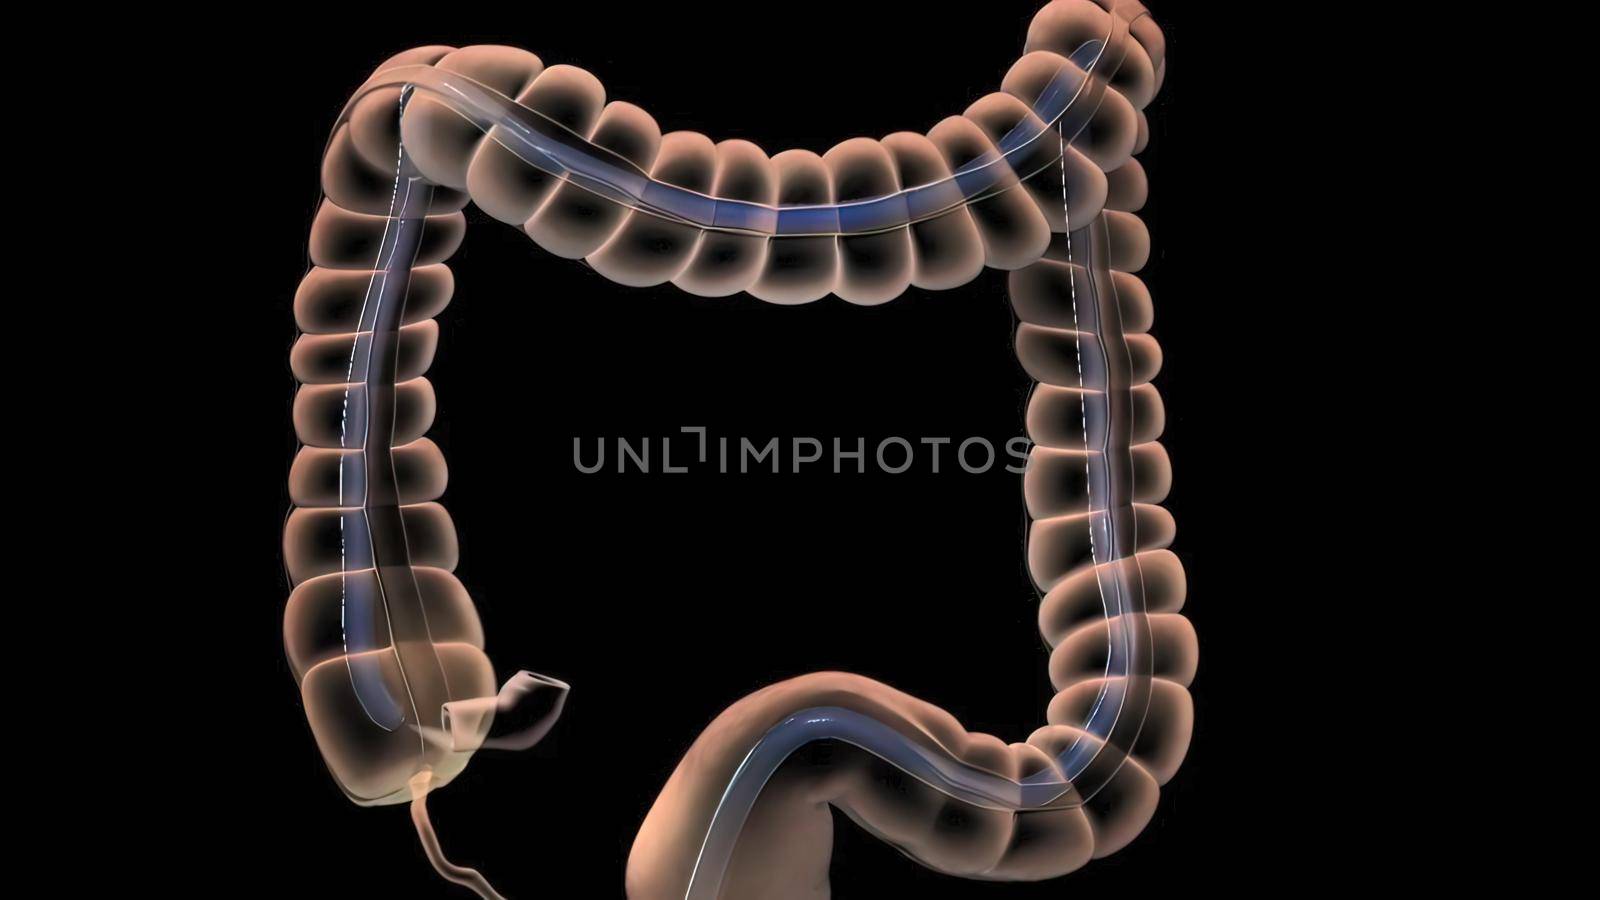 The Human Digestive System. 3D illustration of the colonoscopy Procedure by creativepic